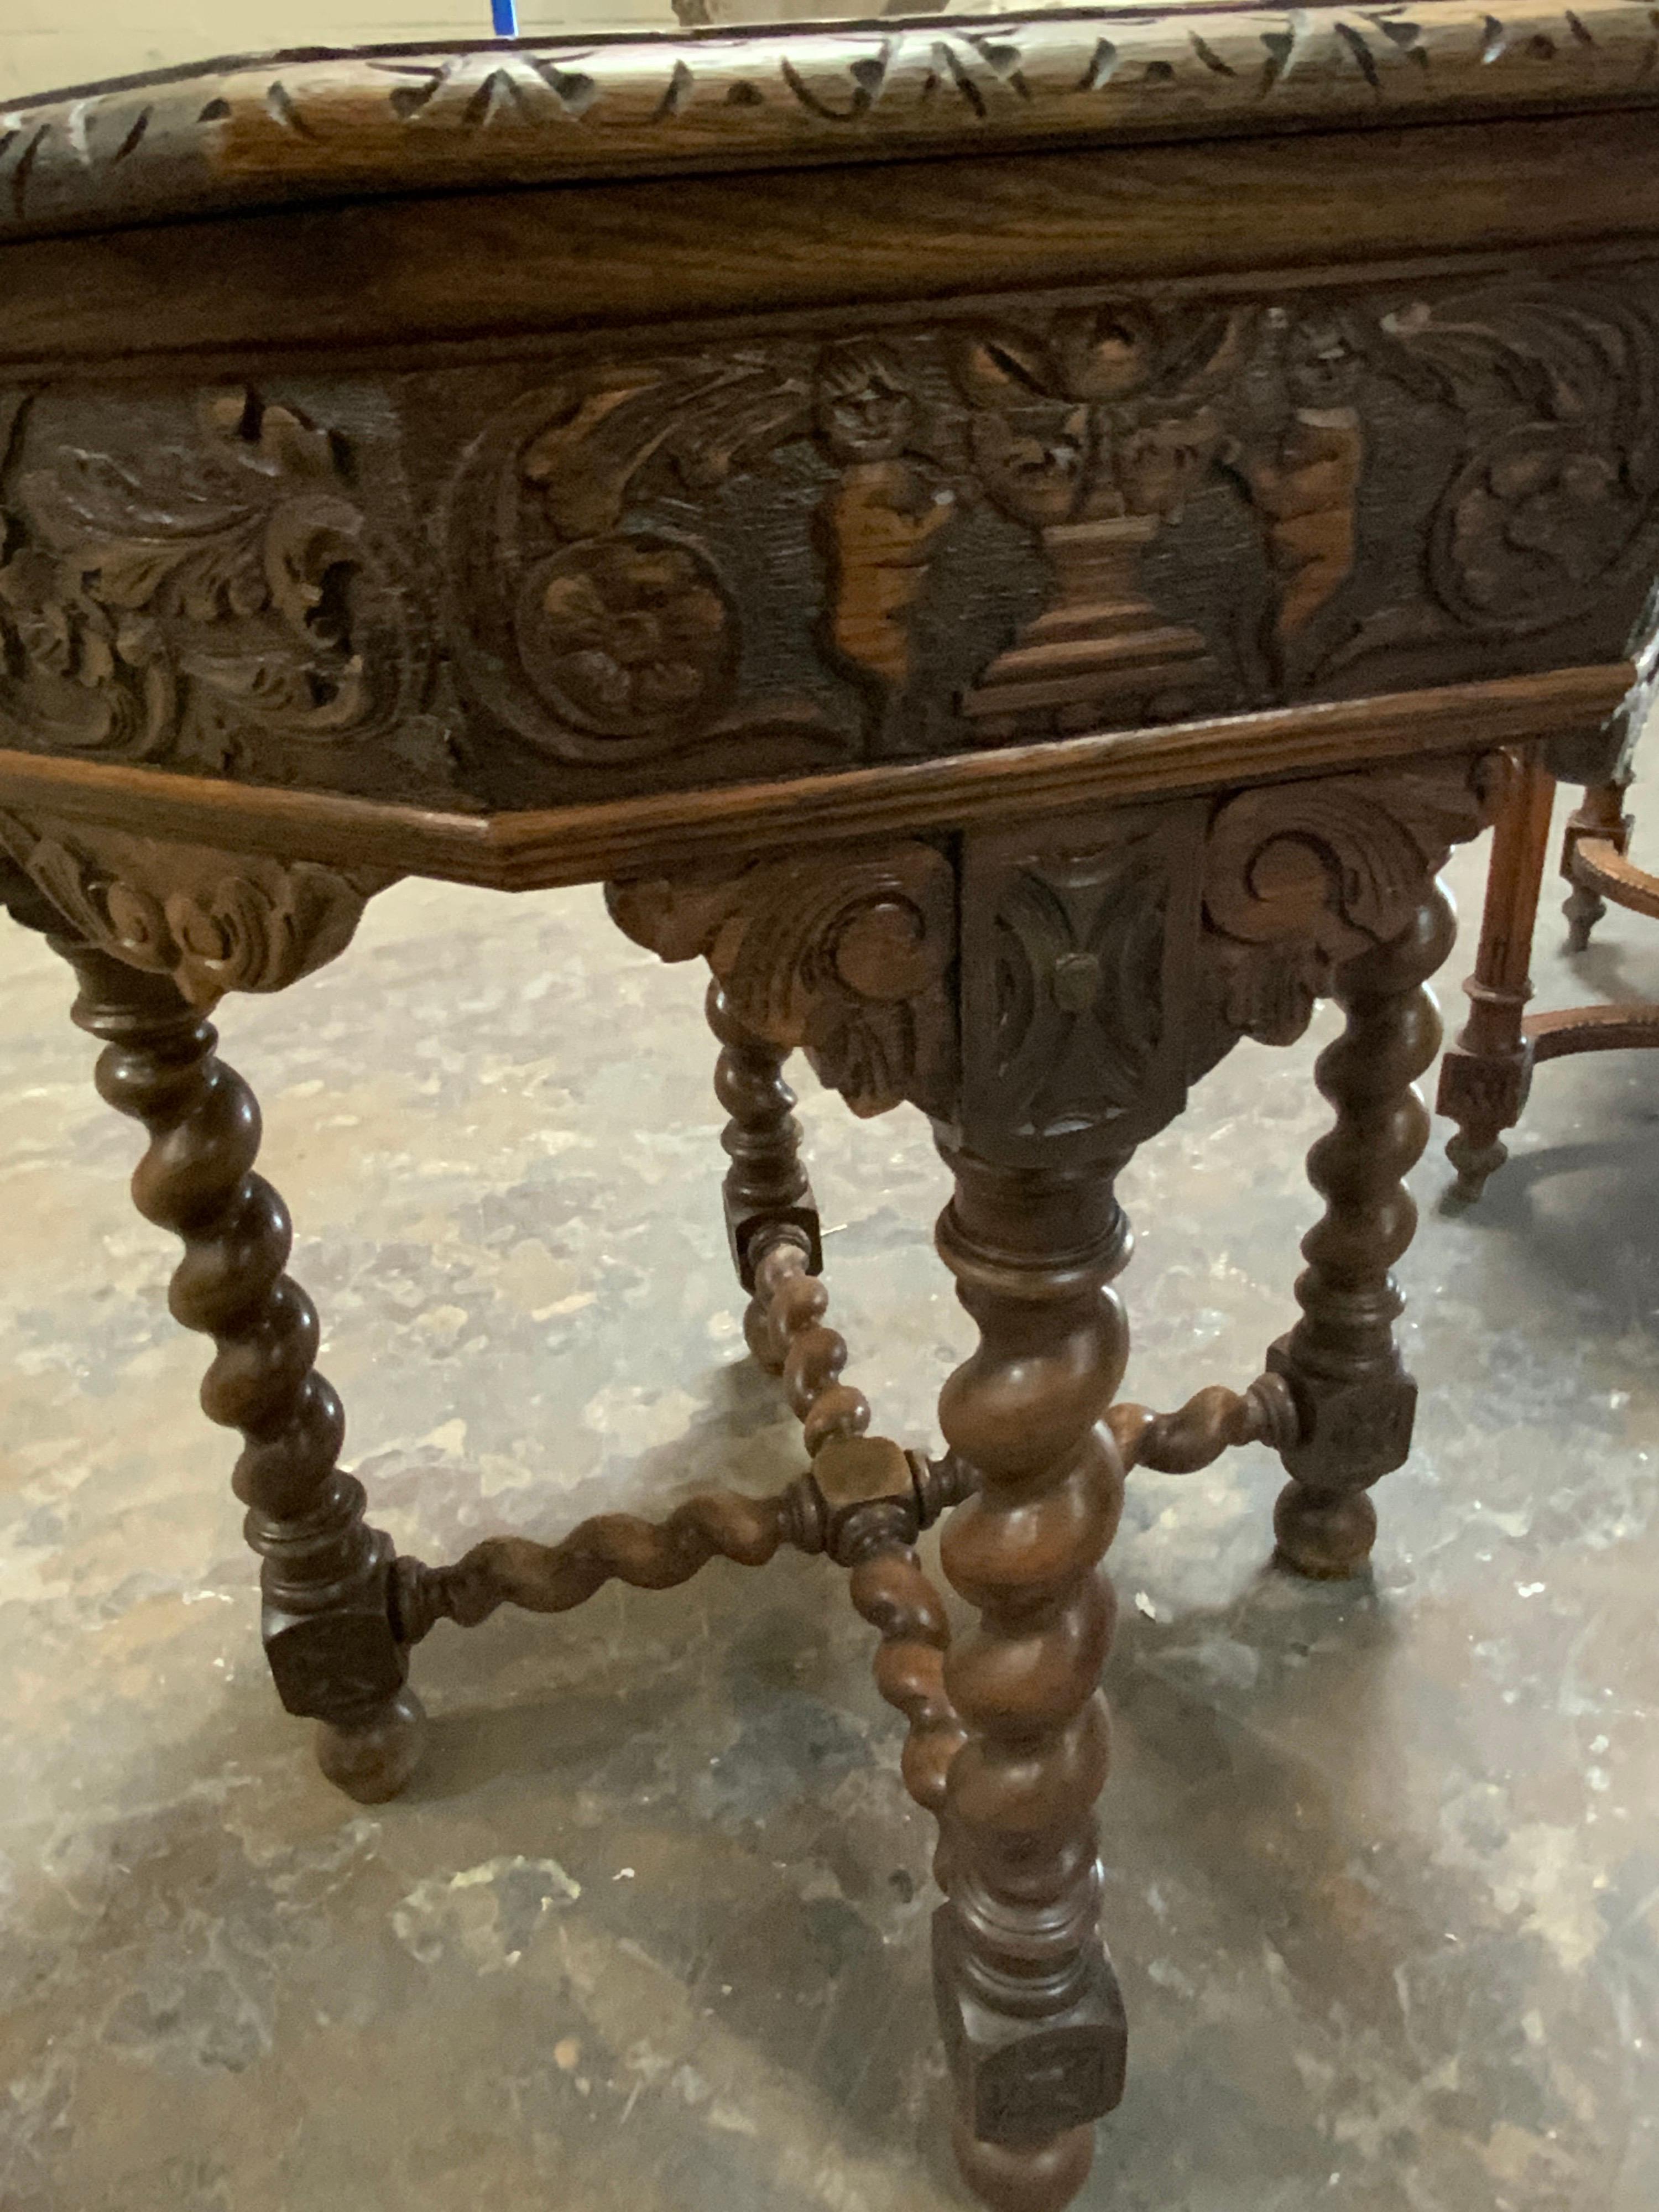 This hand-carved oak table features an octagonal surface with intricate design along the edge. Origin Spain.